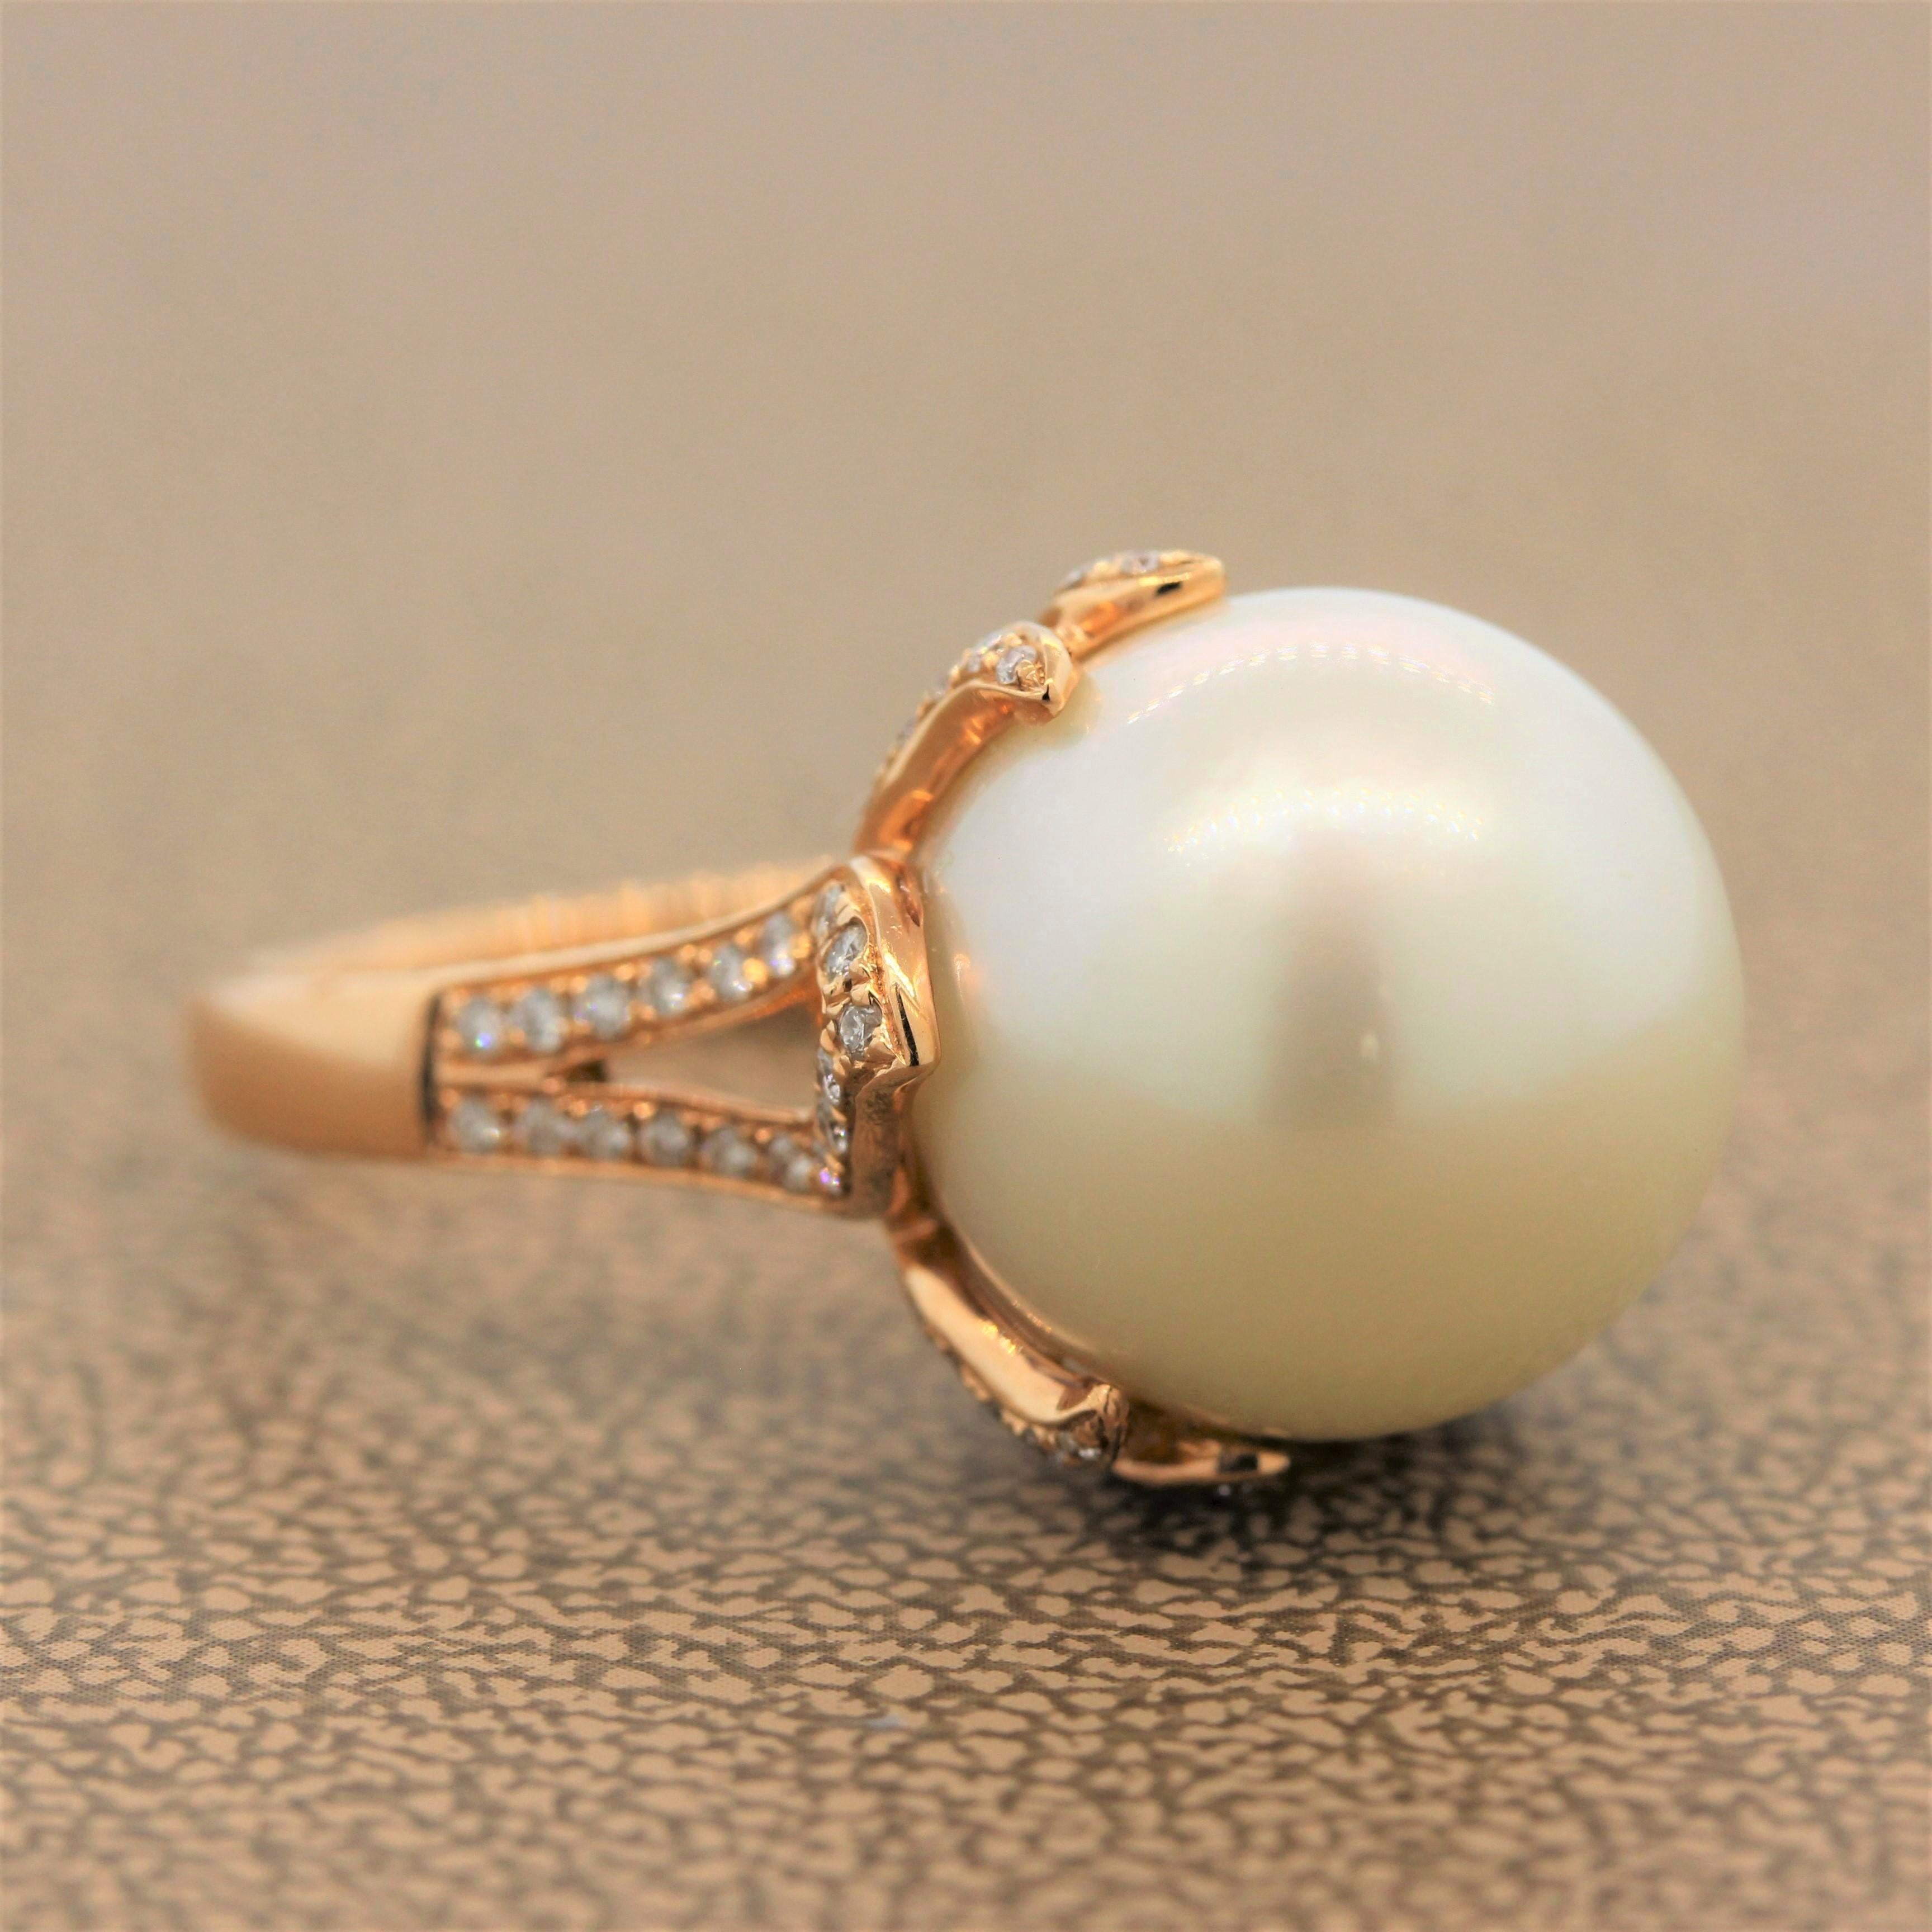 A wondrous iridescent 12.5mm pearl sits in a lotus design ring. The split shank ring is studded with 0.48 carats of round cut diamonds in an 18K rose gold setting. A feminine ring for every day.

Ring Size 6.25 (Sizable)
